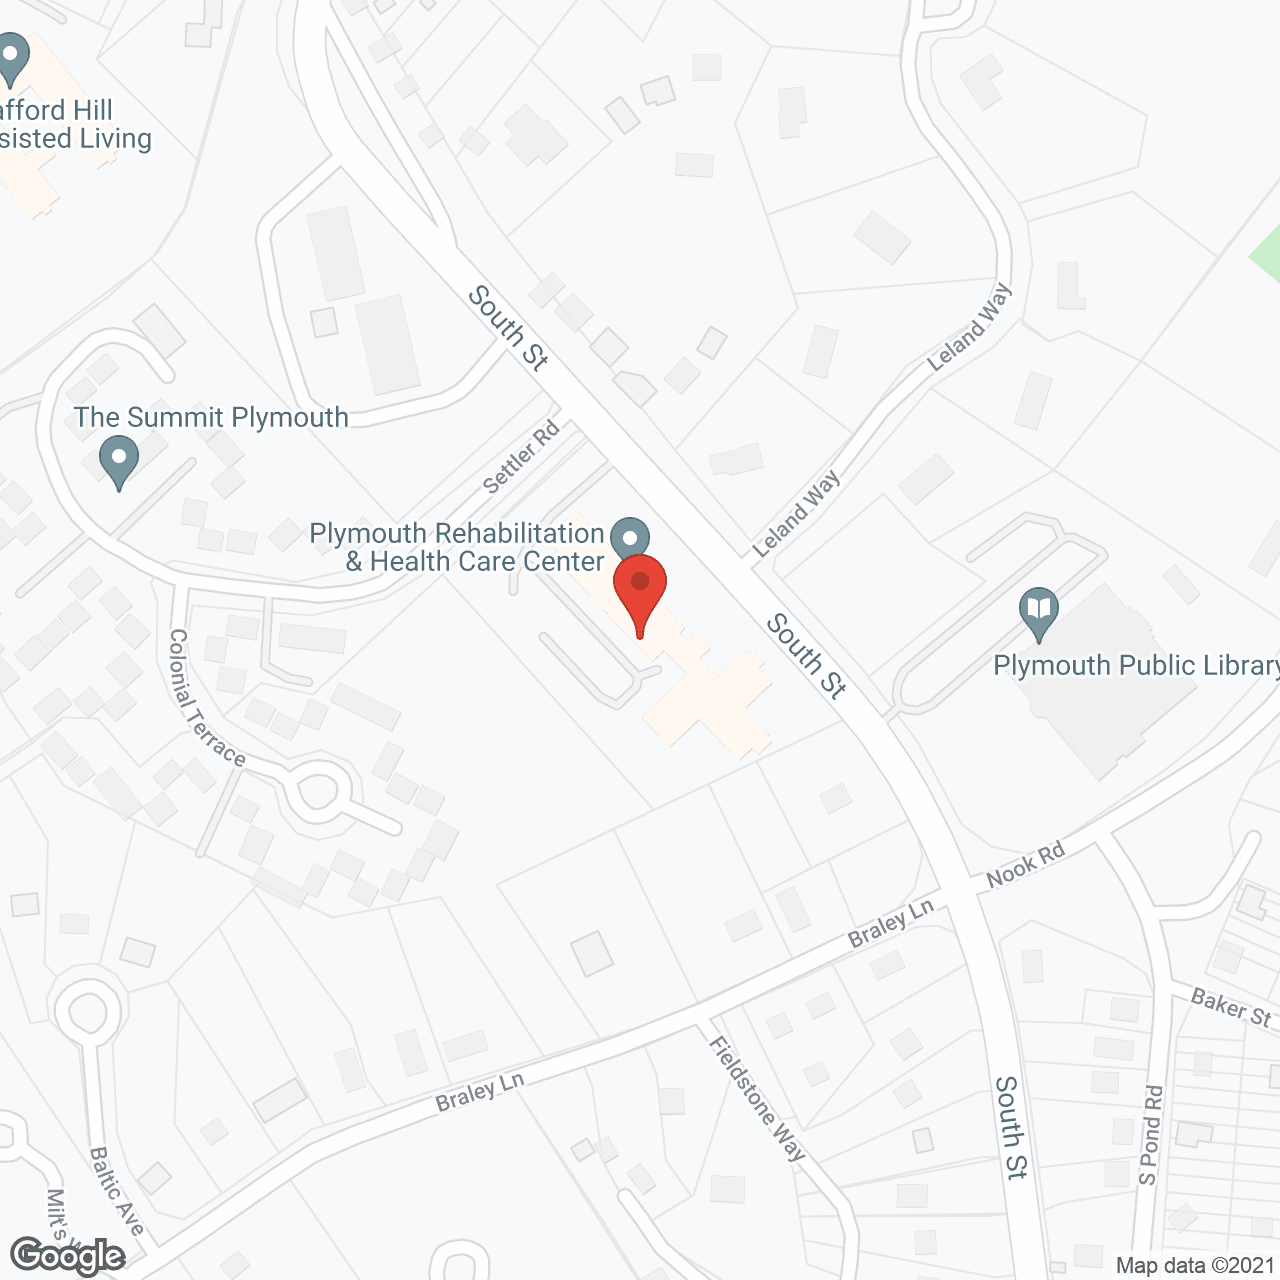 Plymouth Rehabilitation and Skilled Nursing C in google map